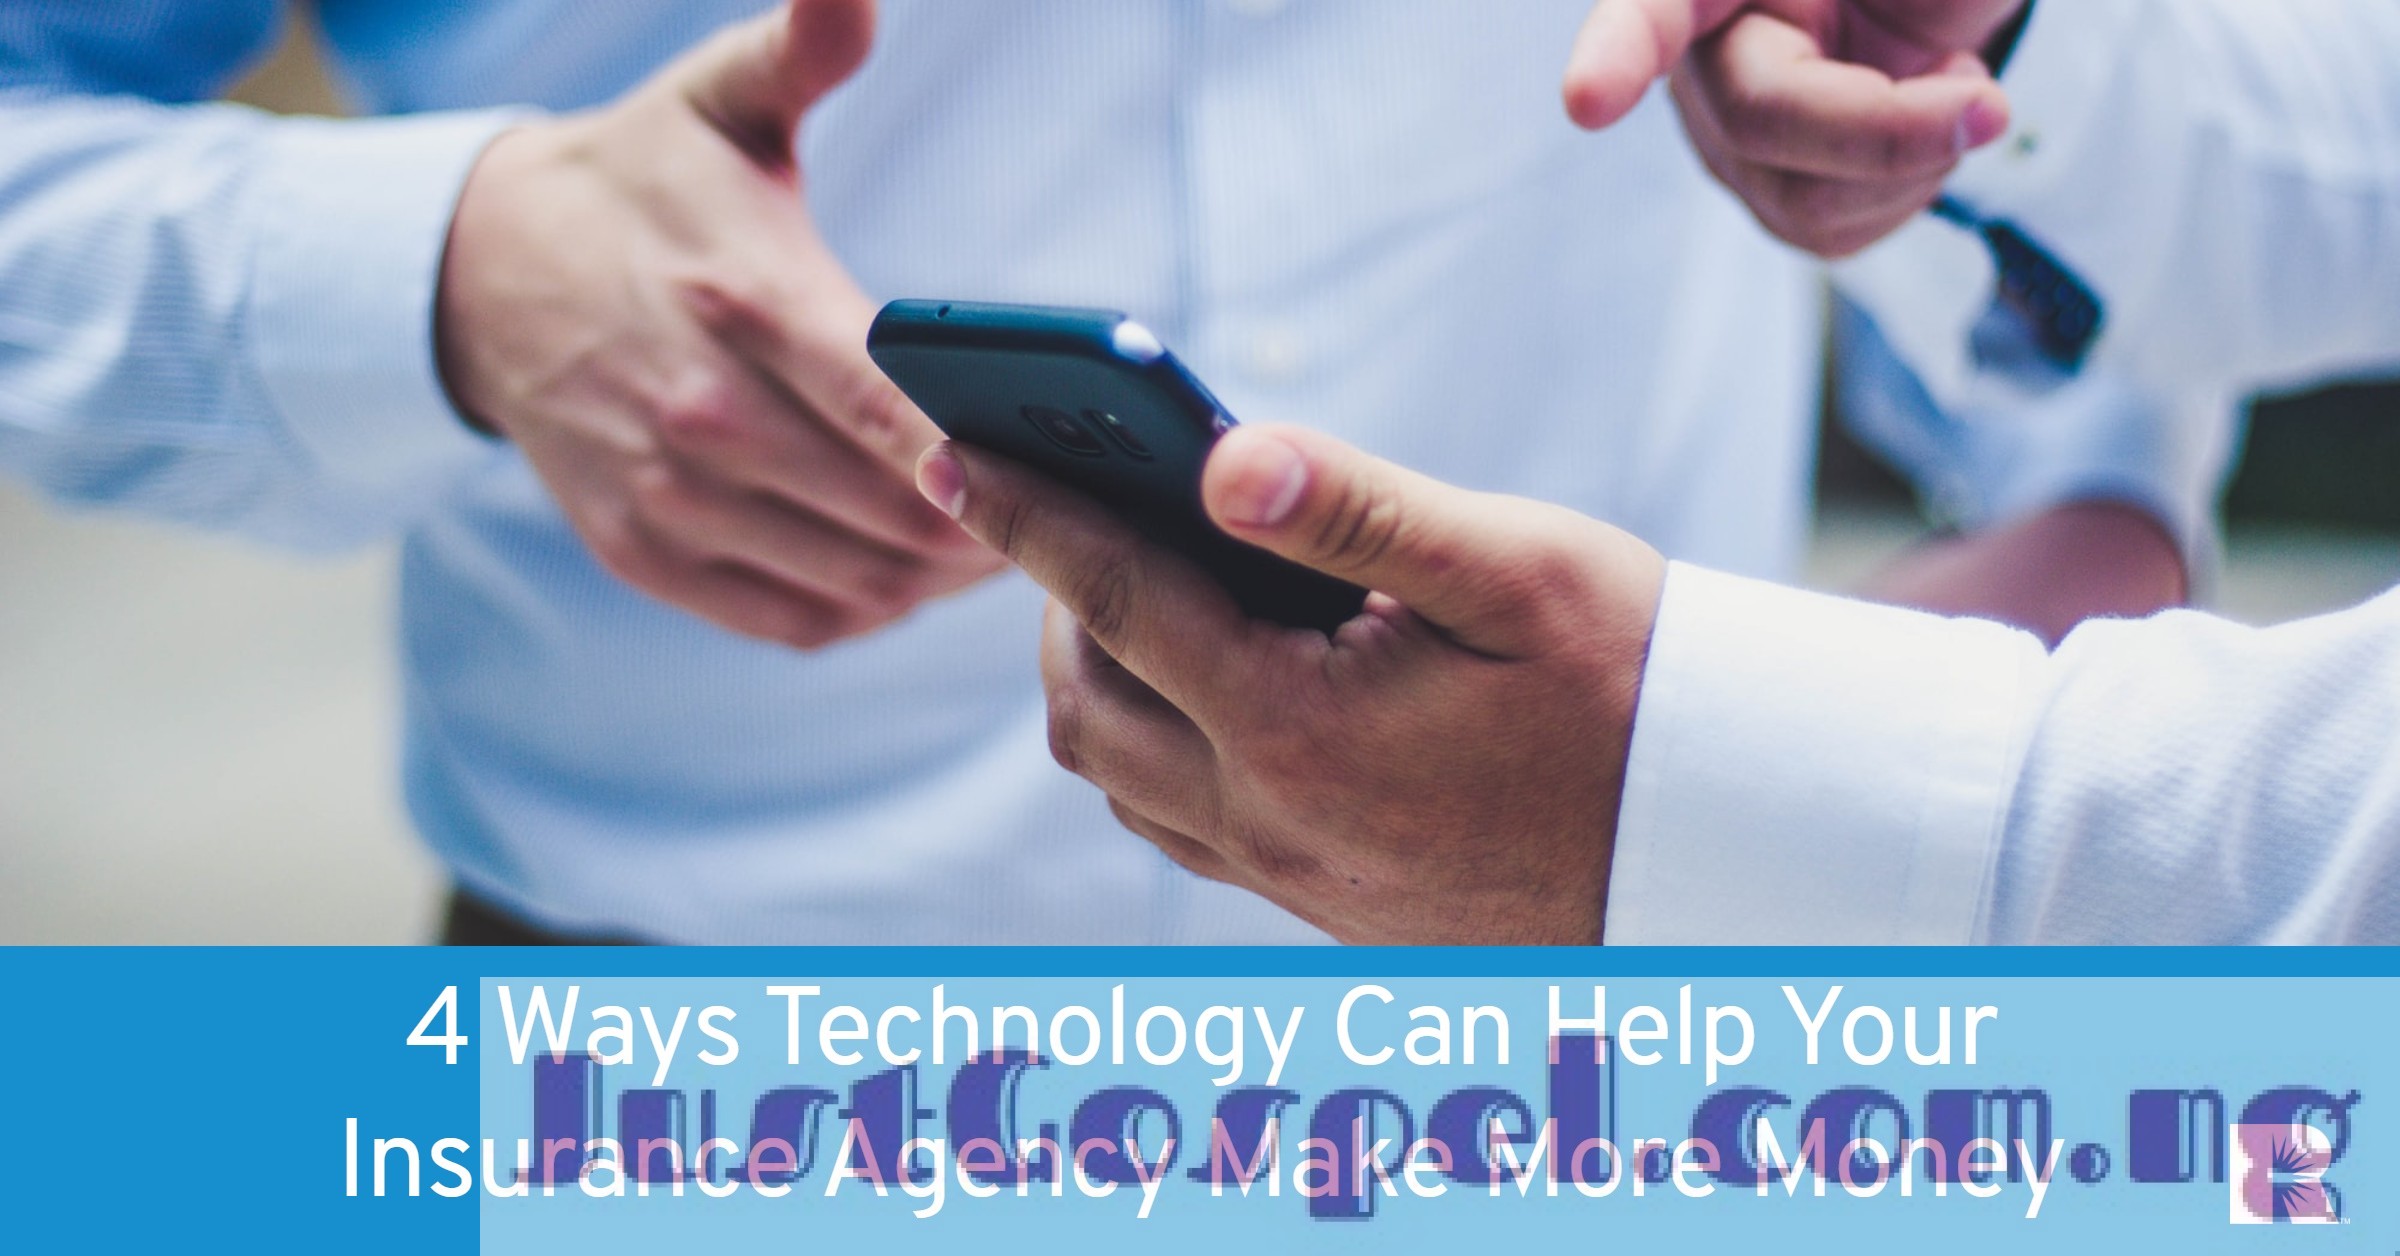 4 Ways Technology Can Help Your Insurance Agency Make More Money